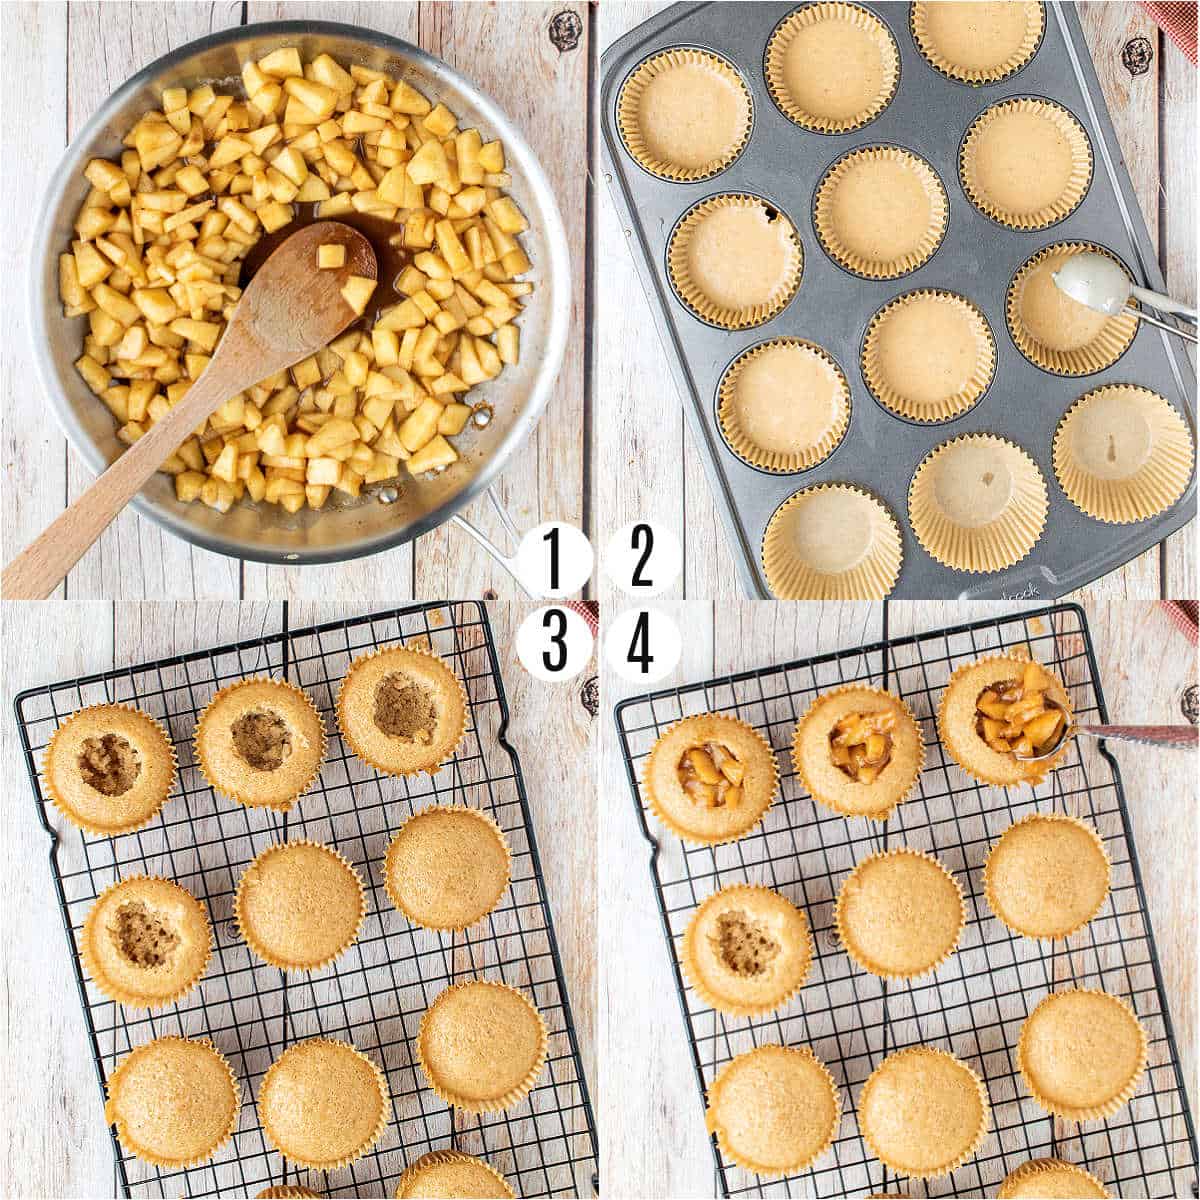 Step by step photos showing how to make caramel apple filled cupcakes.